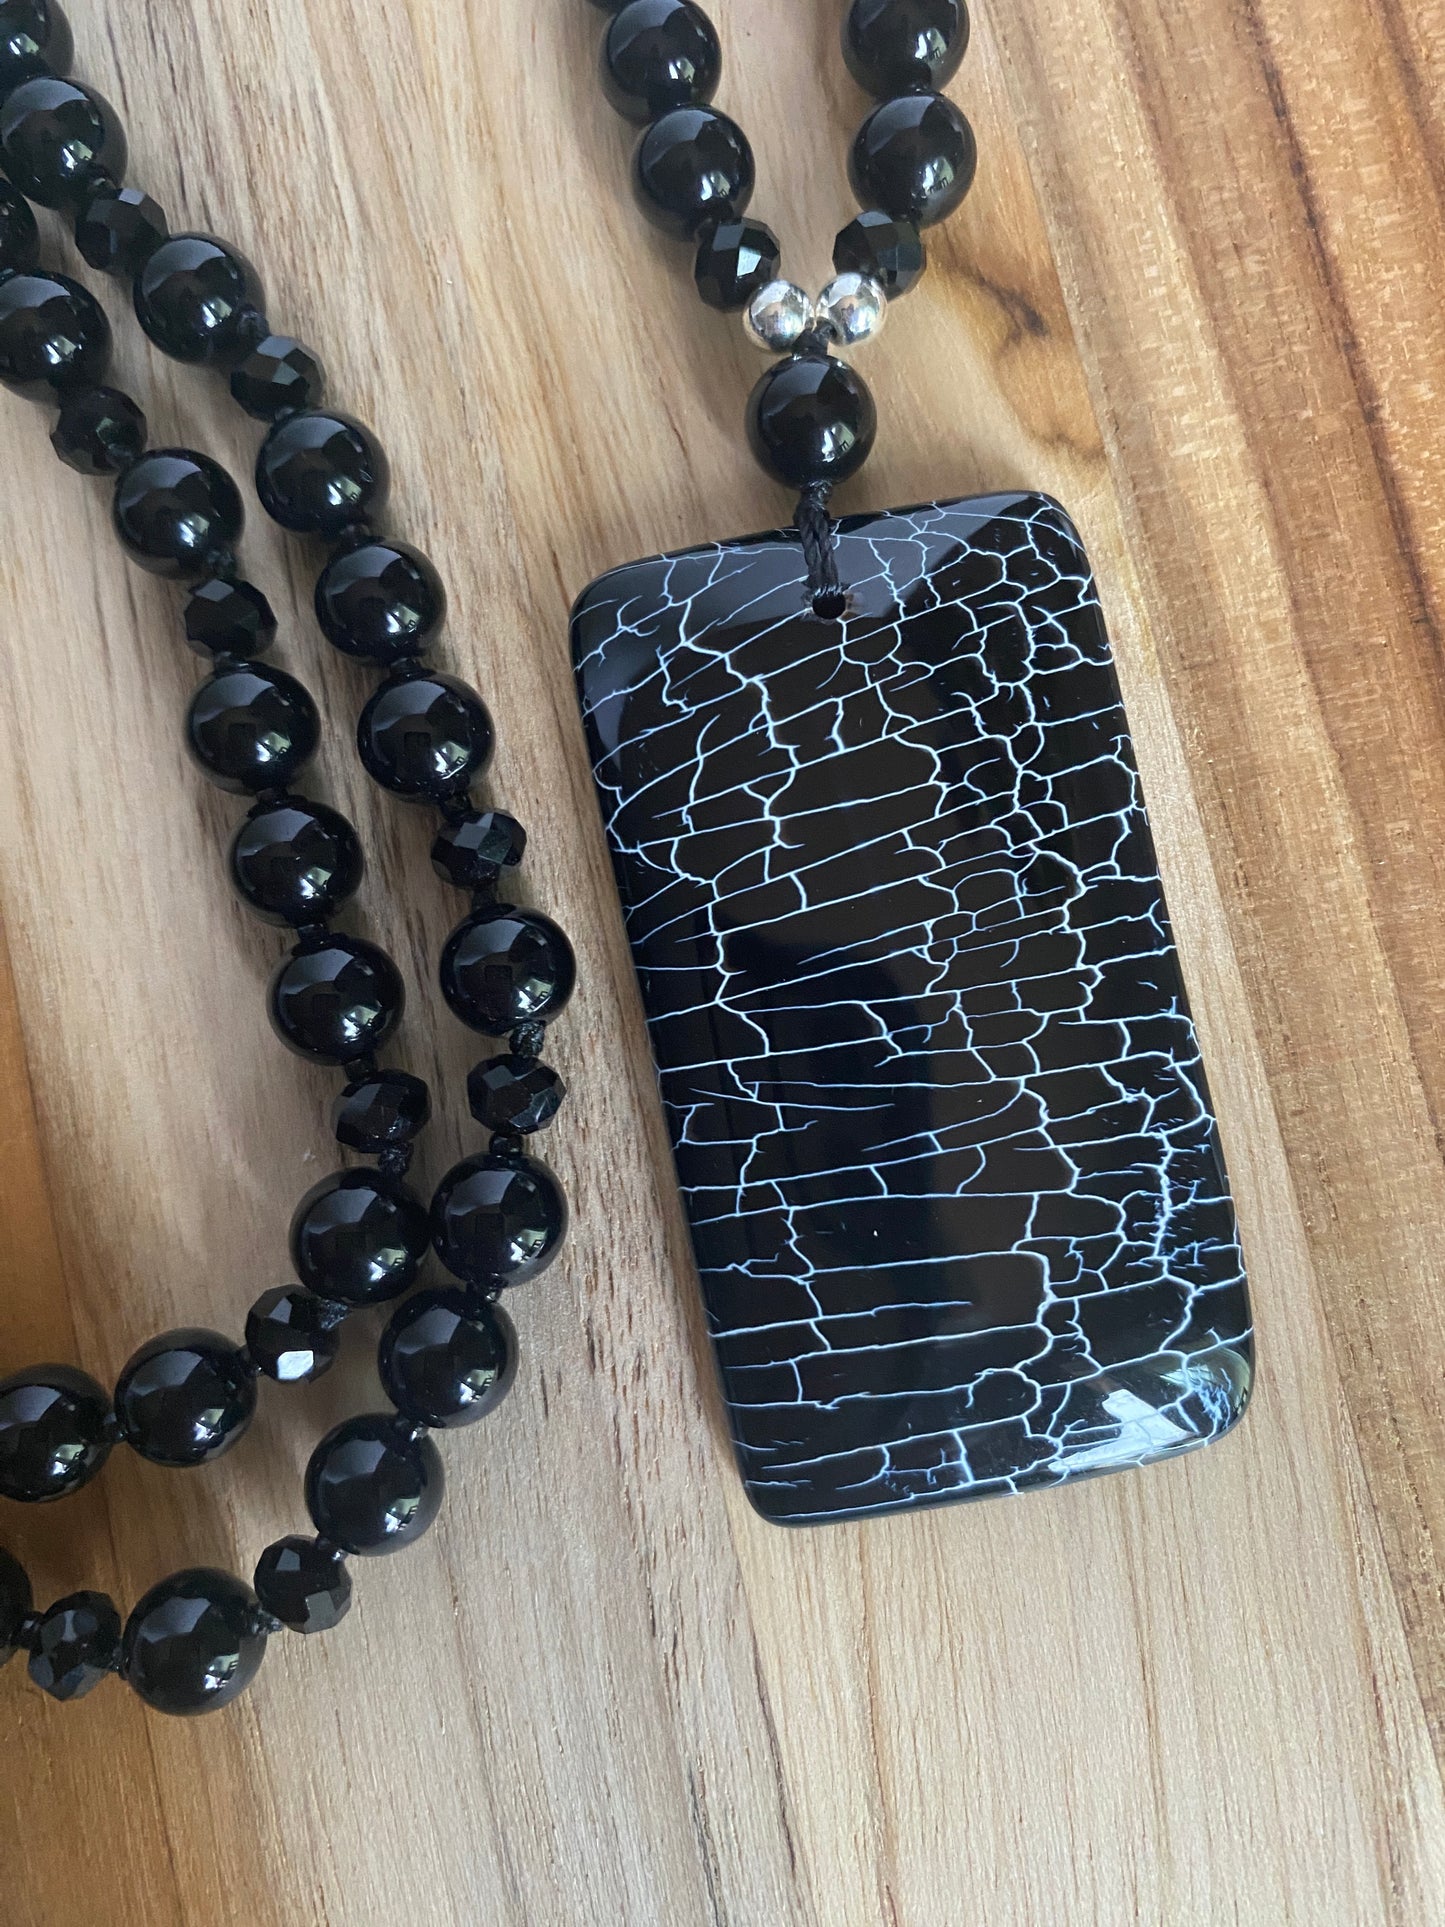 30" Long Hand knotted Black Agate Pendant Necklace with Onyx Beads